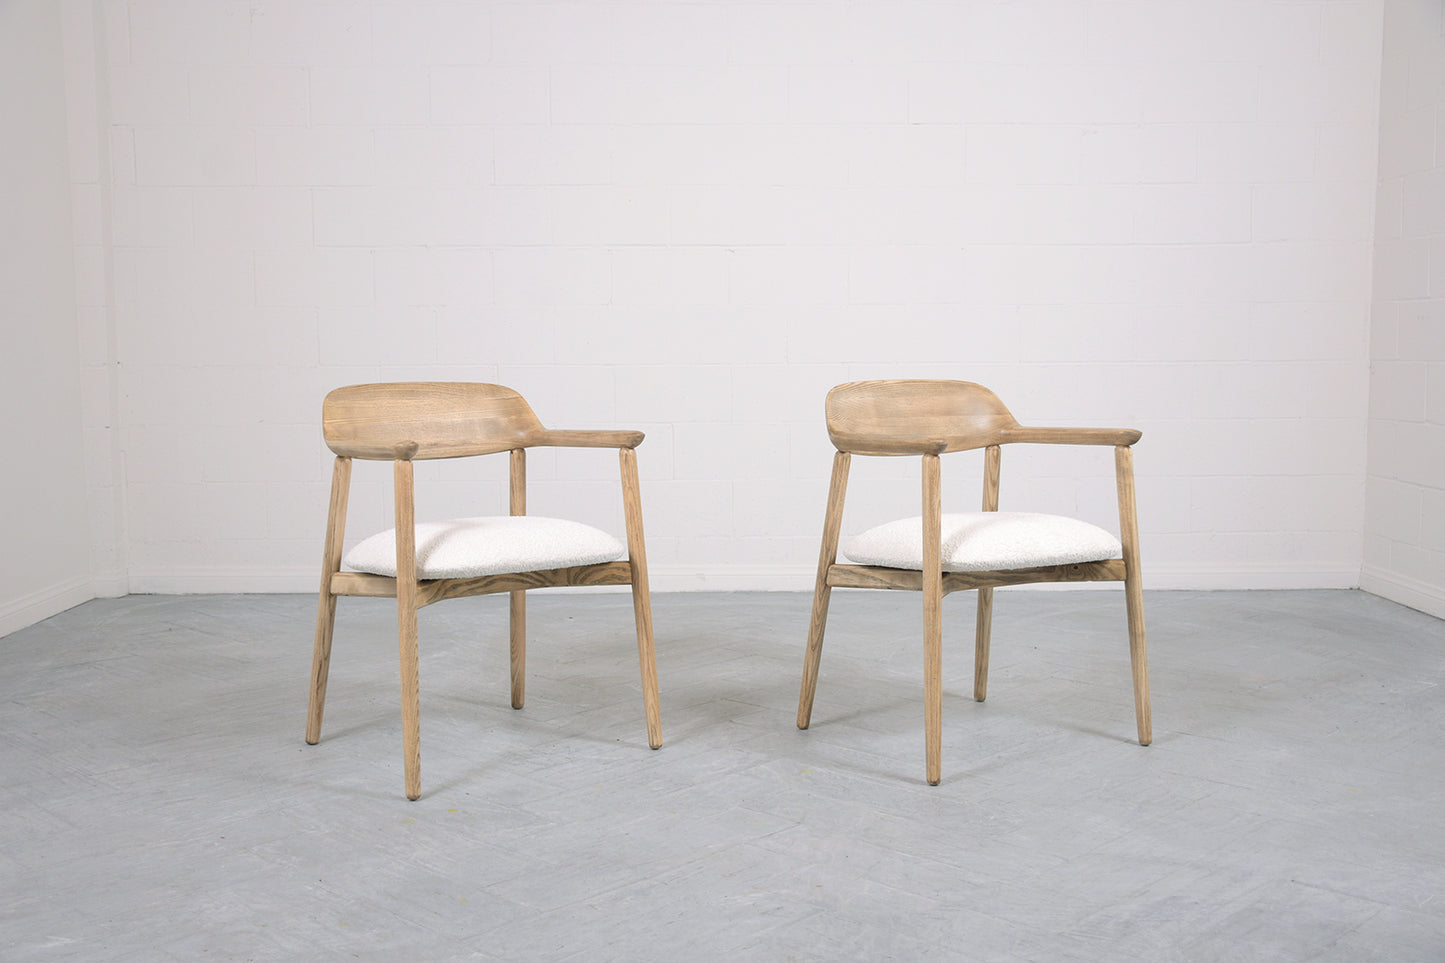 Restored 1990s Mid-Century Boucle Armchairs: White Upholstered with Beech Finish